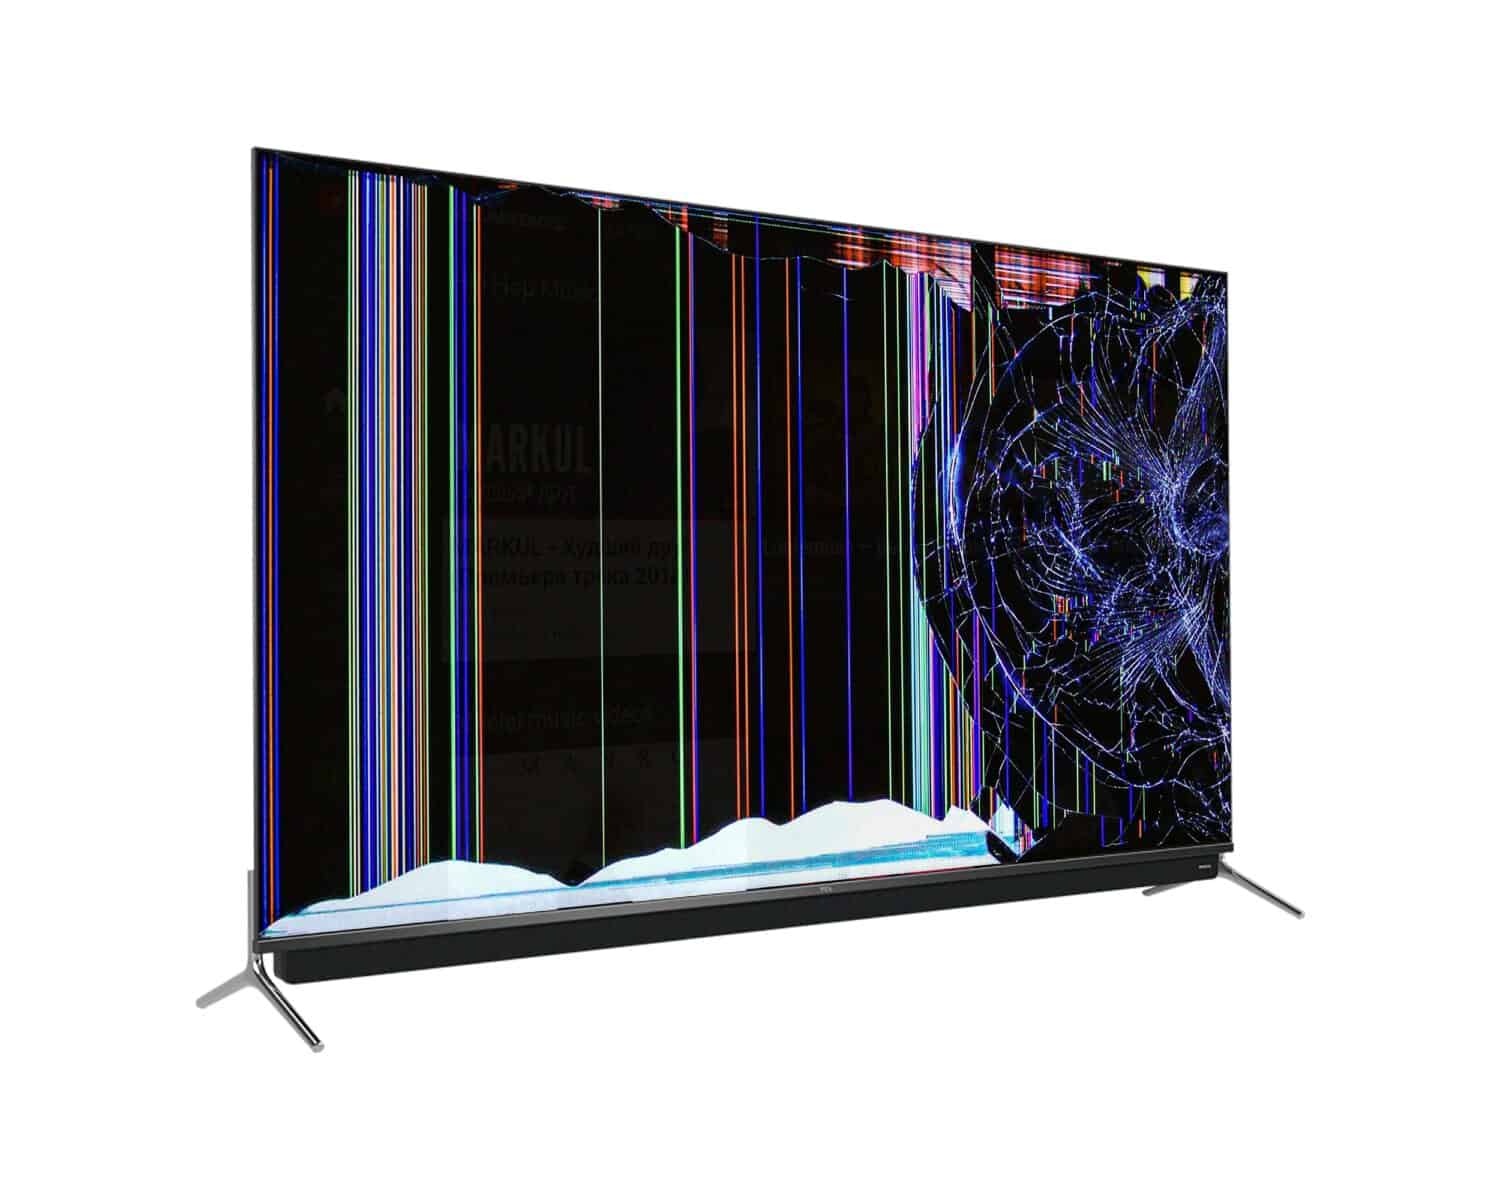 Why You Shouldn’t Buy An OLED TV?